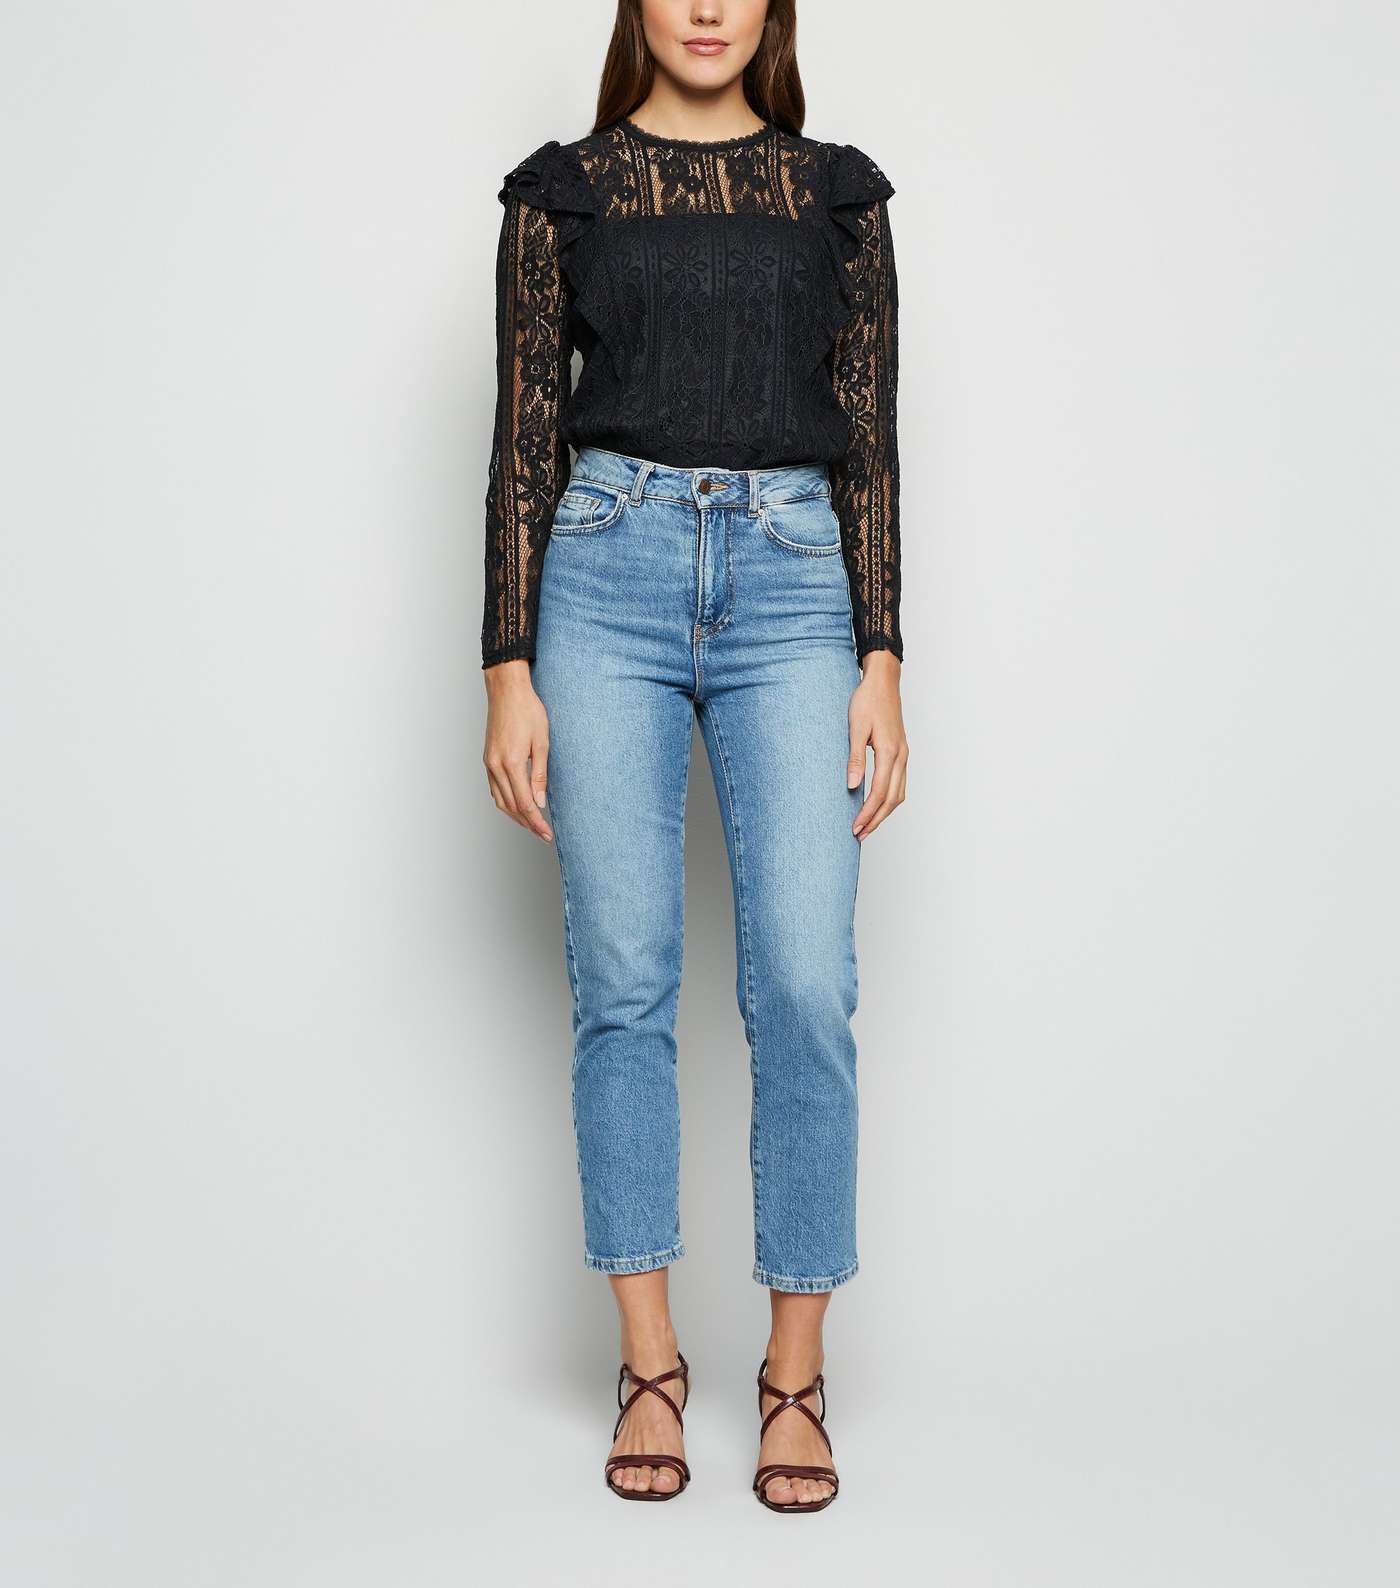 Black Lace Long Sleeve Frill Trim Top Image 2